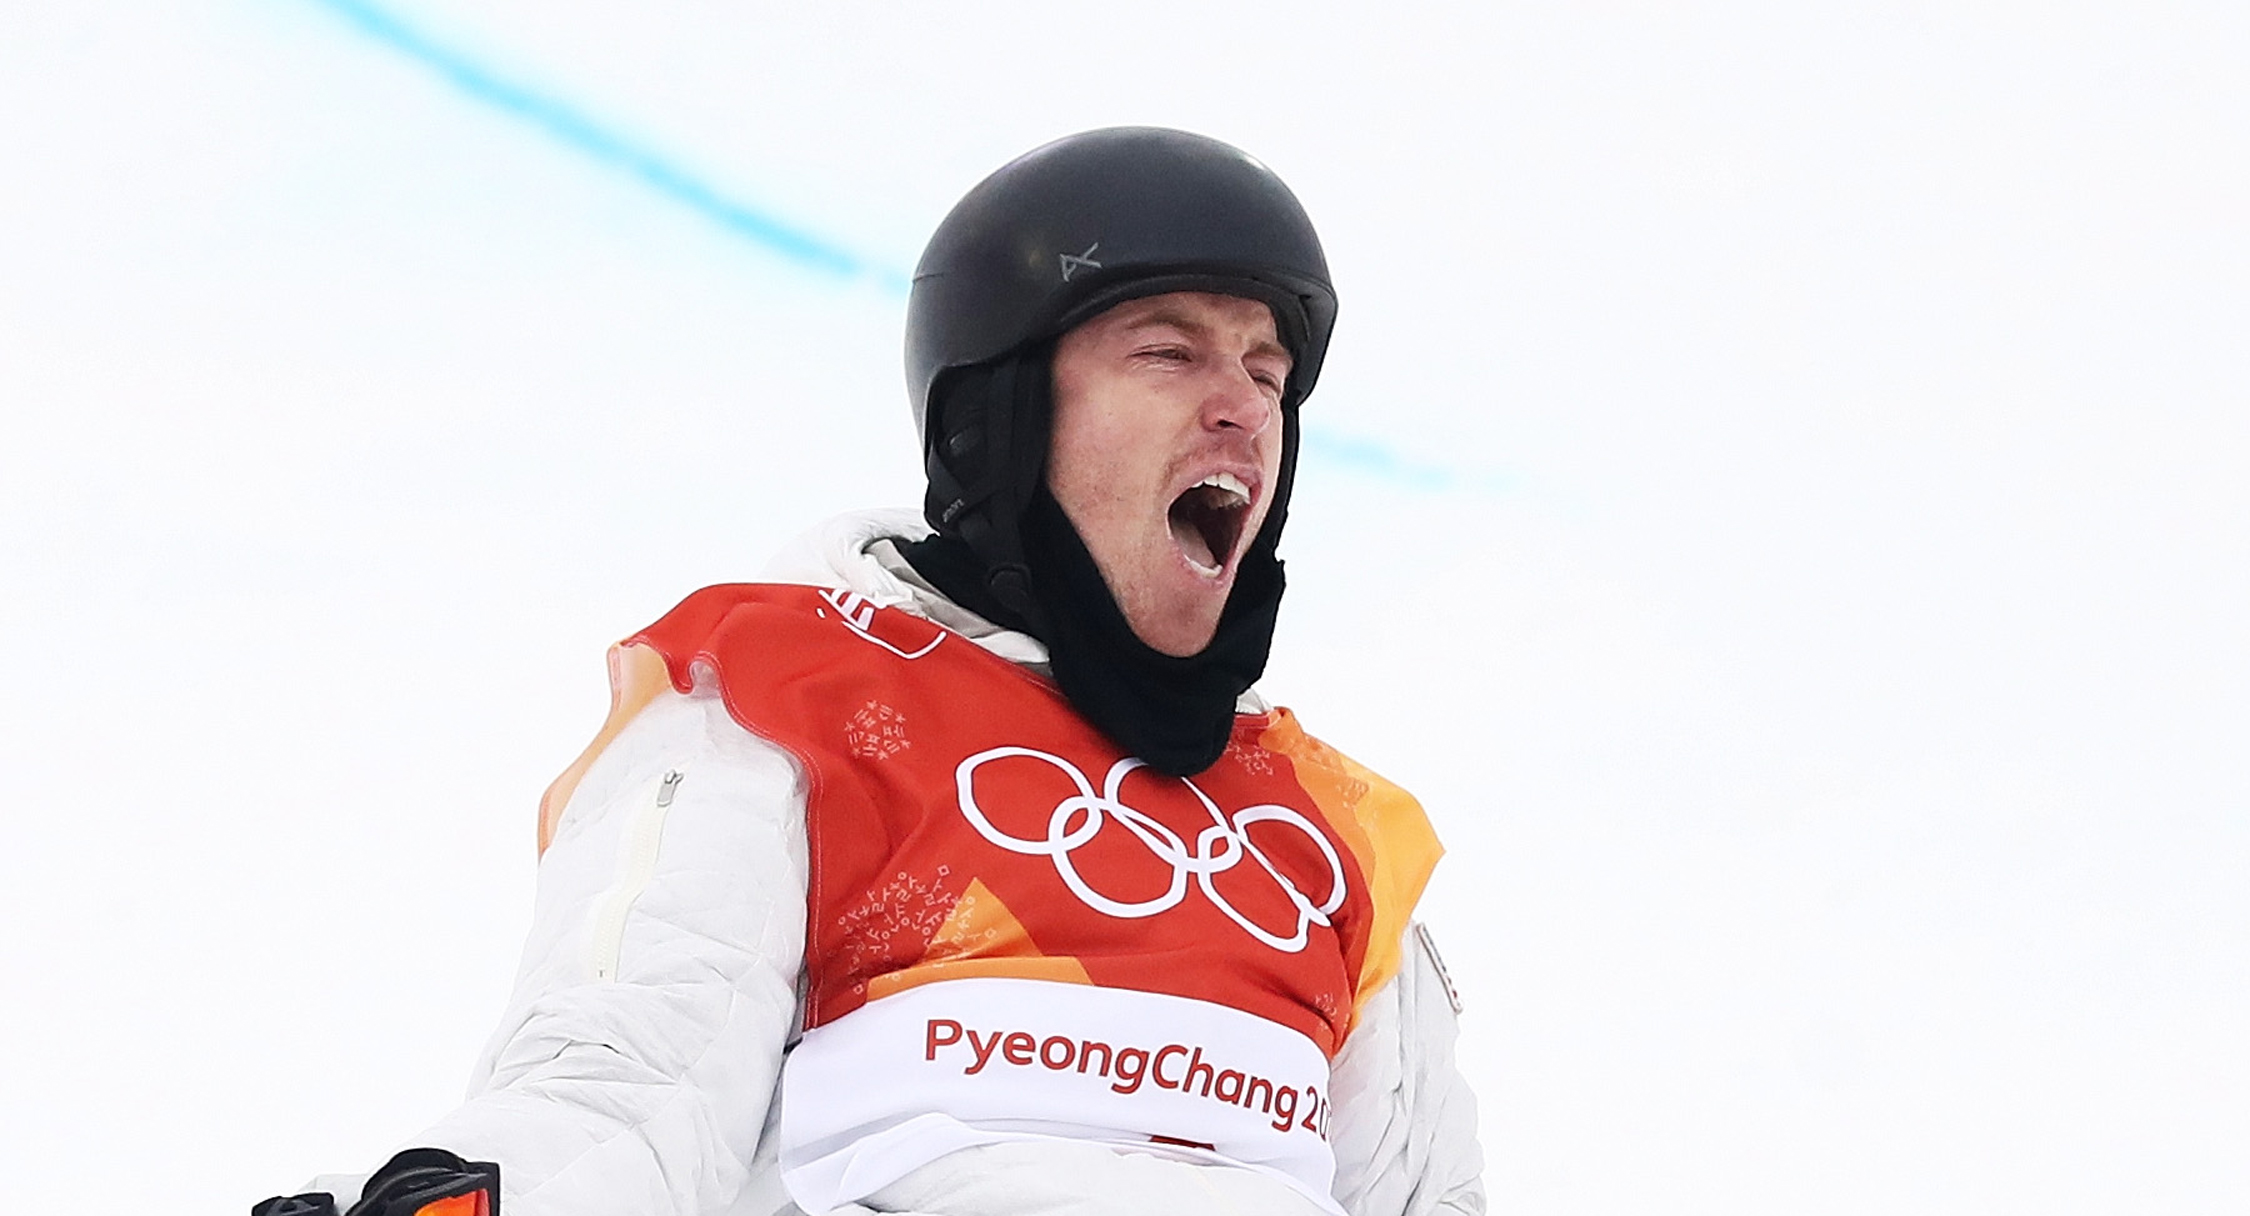 Shaun White celebrates after his third run at the halfpipe at Phoenix Snow Park. (Getty Images - Cameron Spencer)